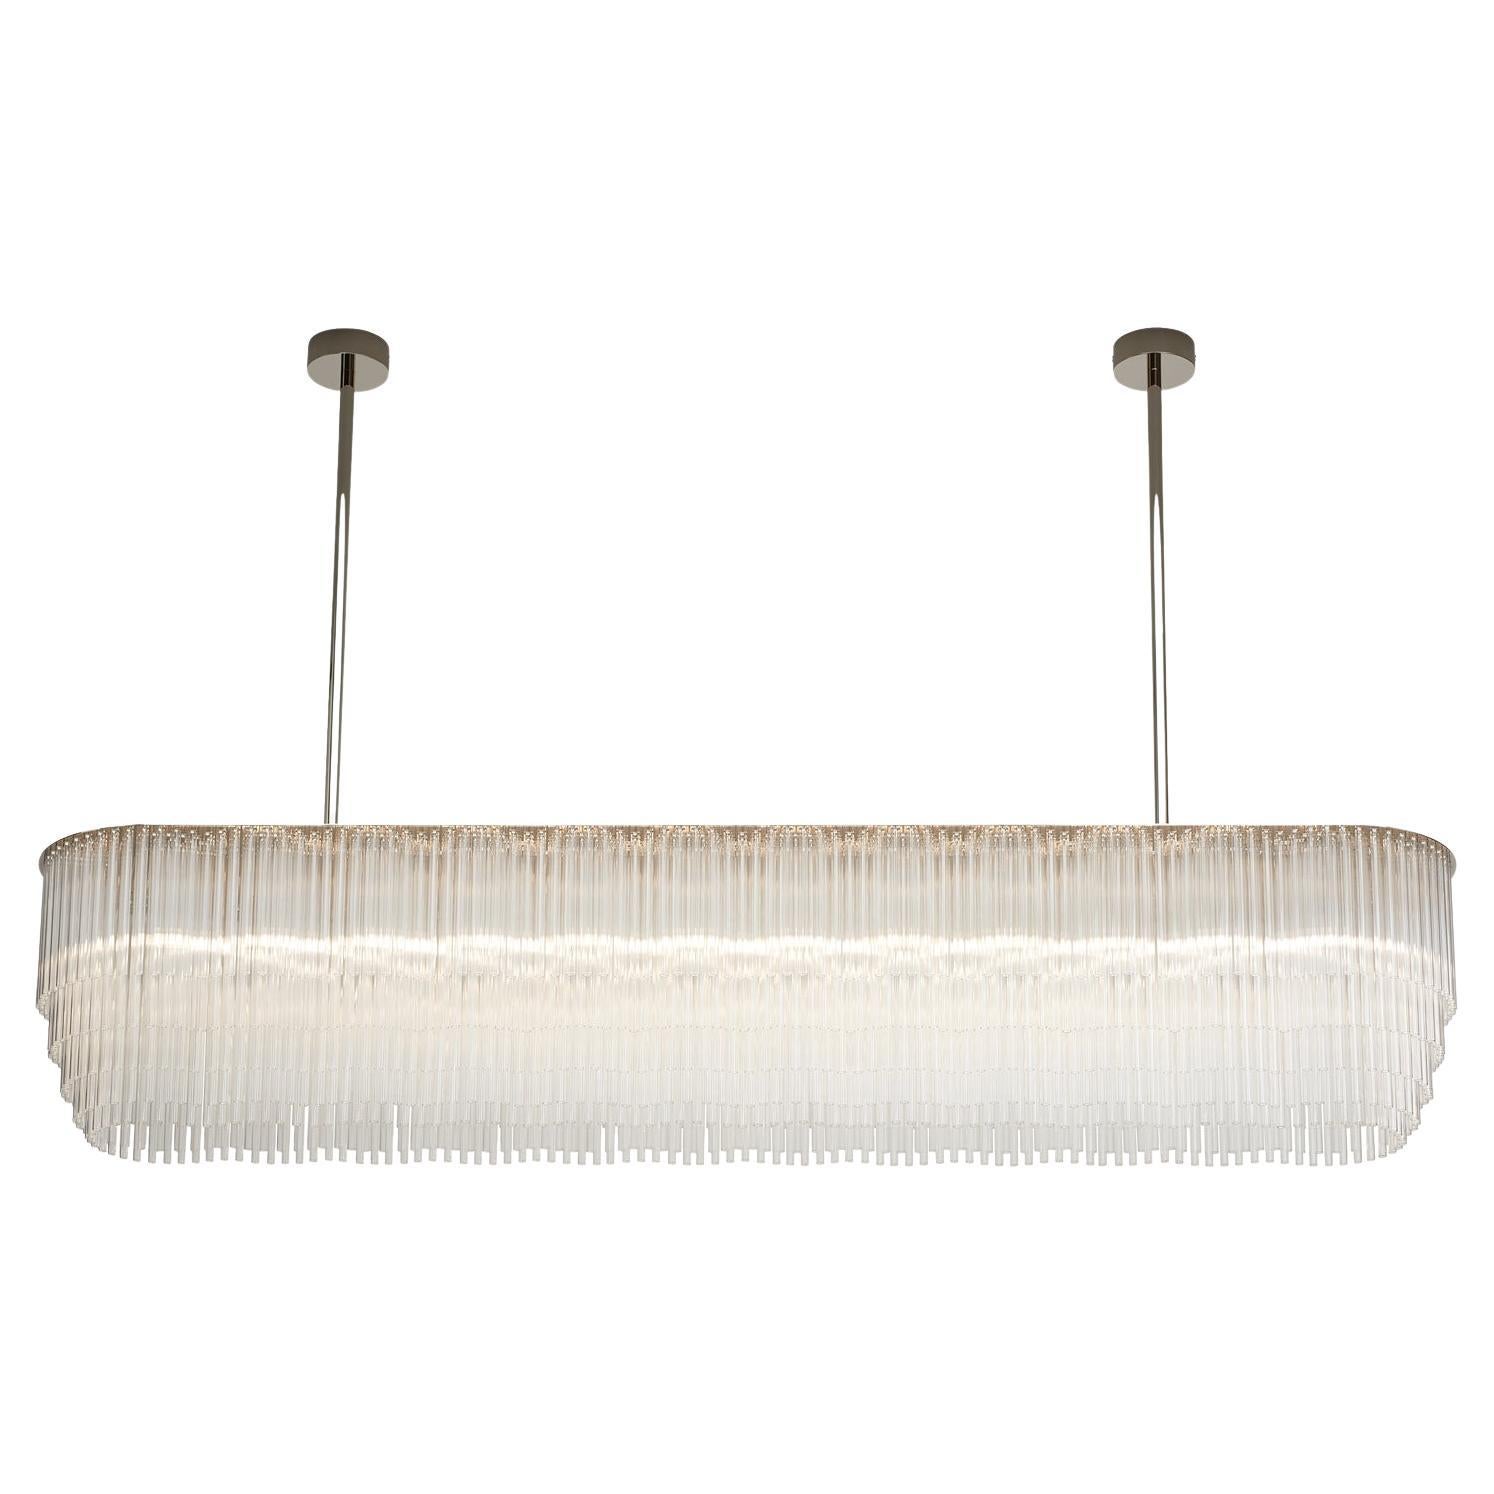 Linear Chandelier 1697mm / 66.75" in Polished Nickel with Tiered Glass Profile For Sale